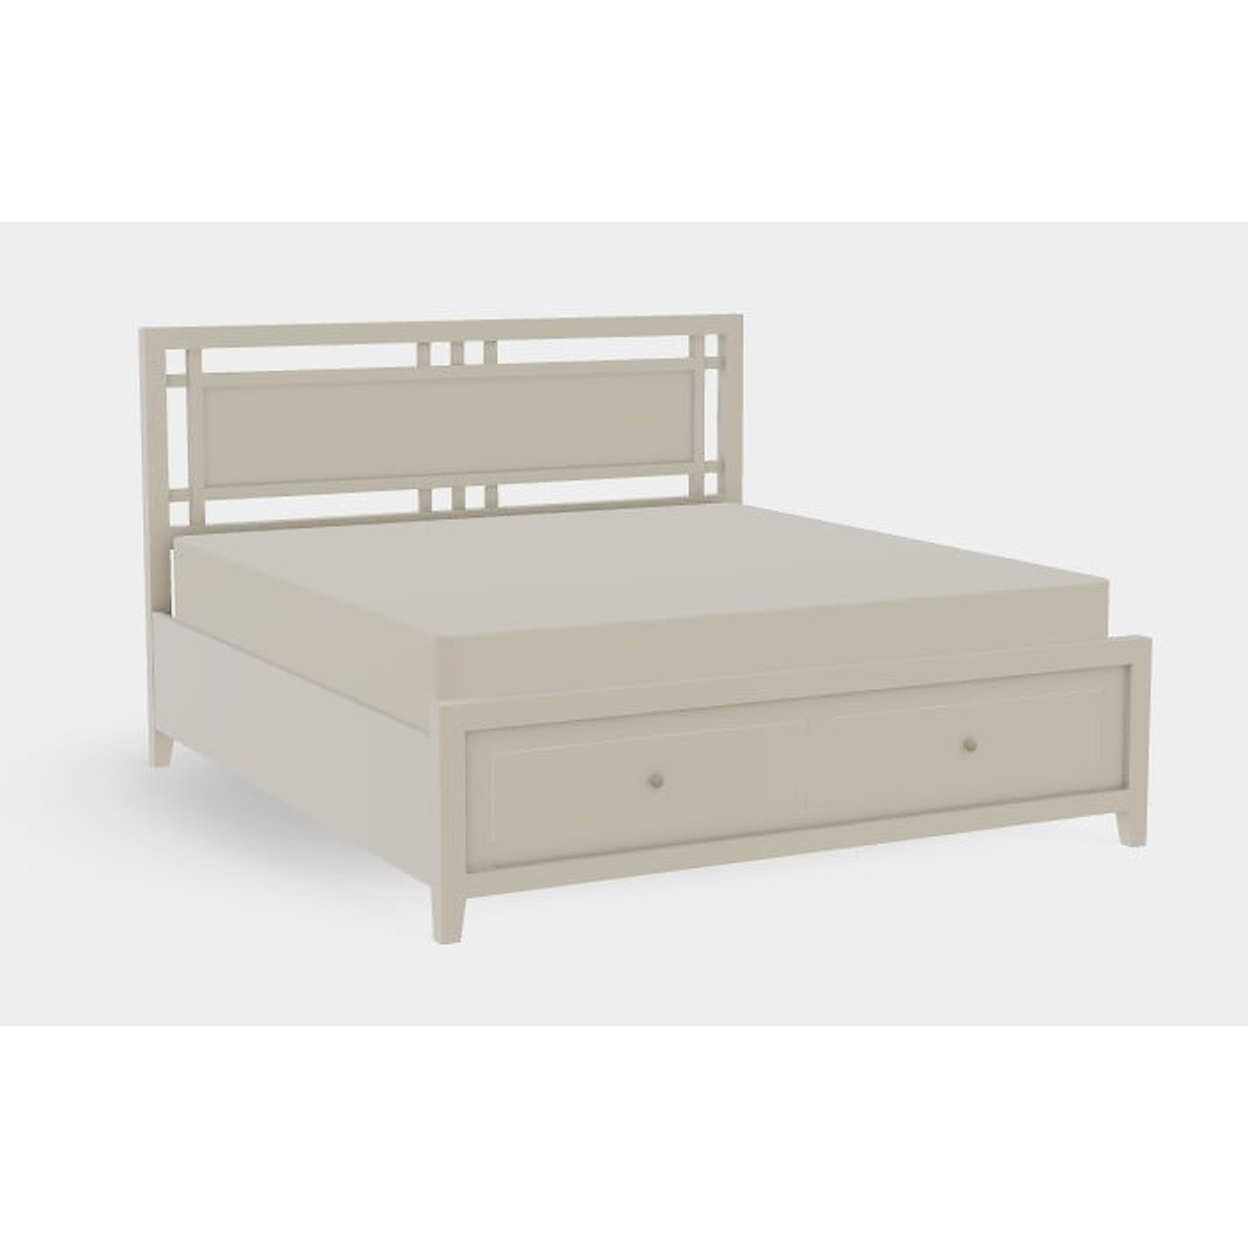 Mavin Atwood Group Atwood King Footboard Storage Gridwork Bed